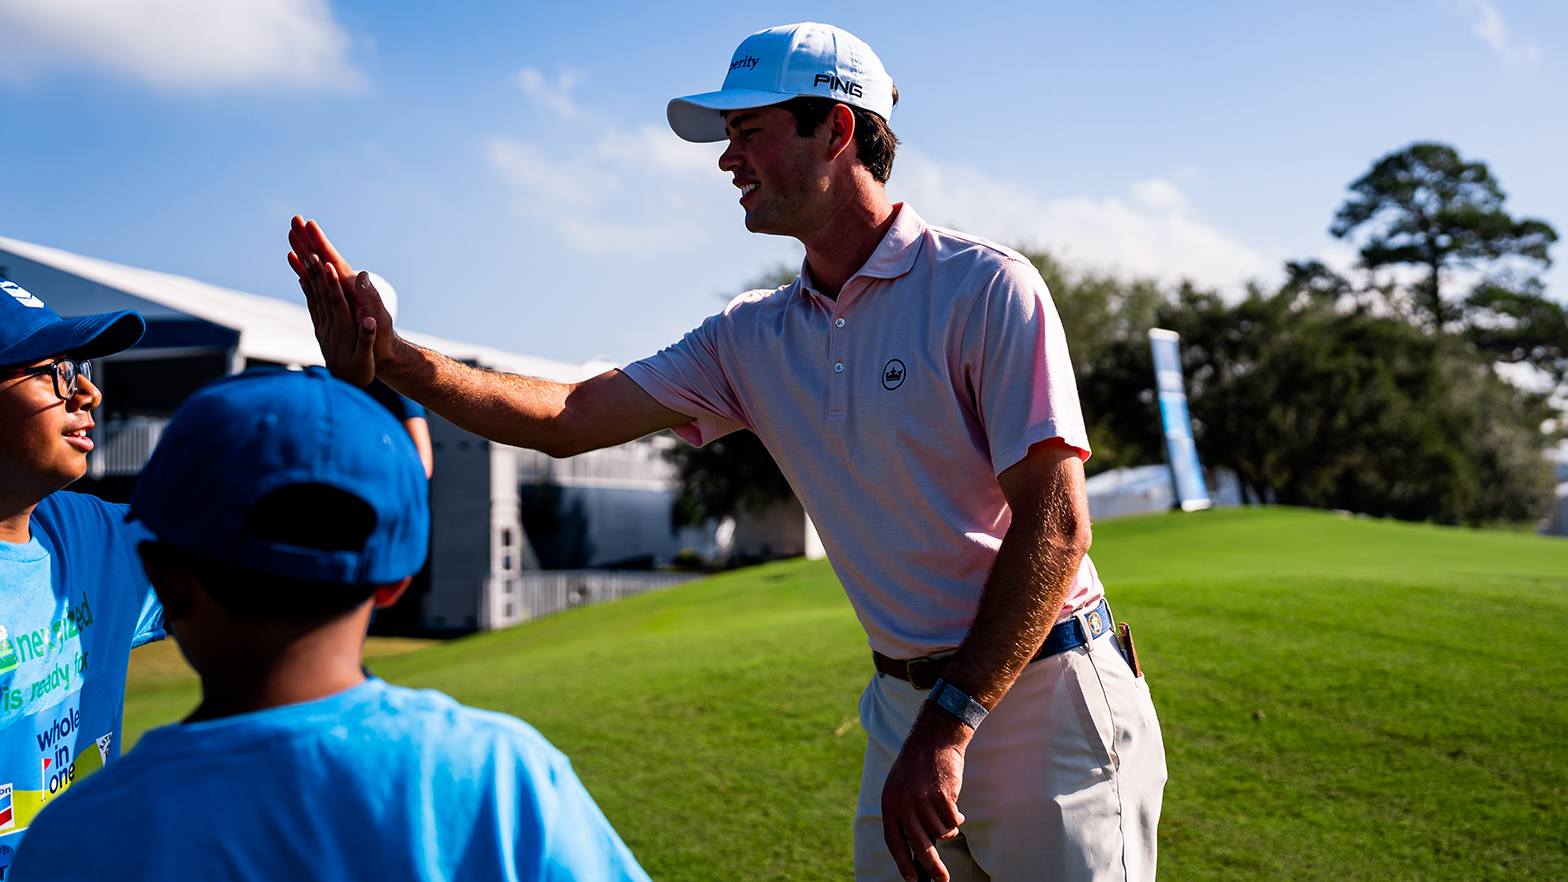 PGA TOUR professional golfer Cole Hammer high-fives a young golfer during our Whole in One golf clinic.